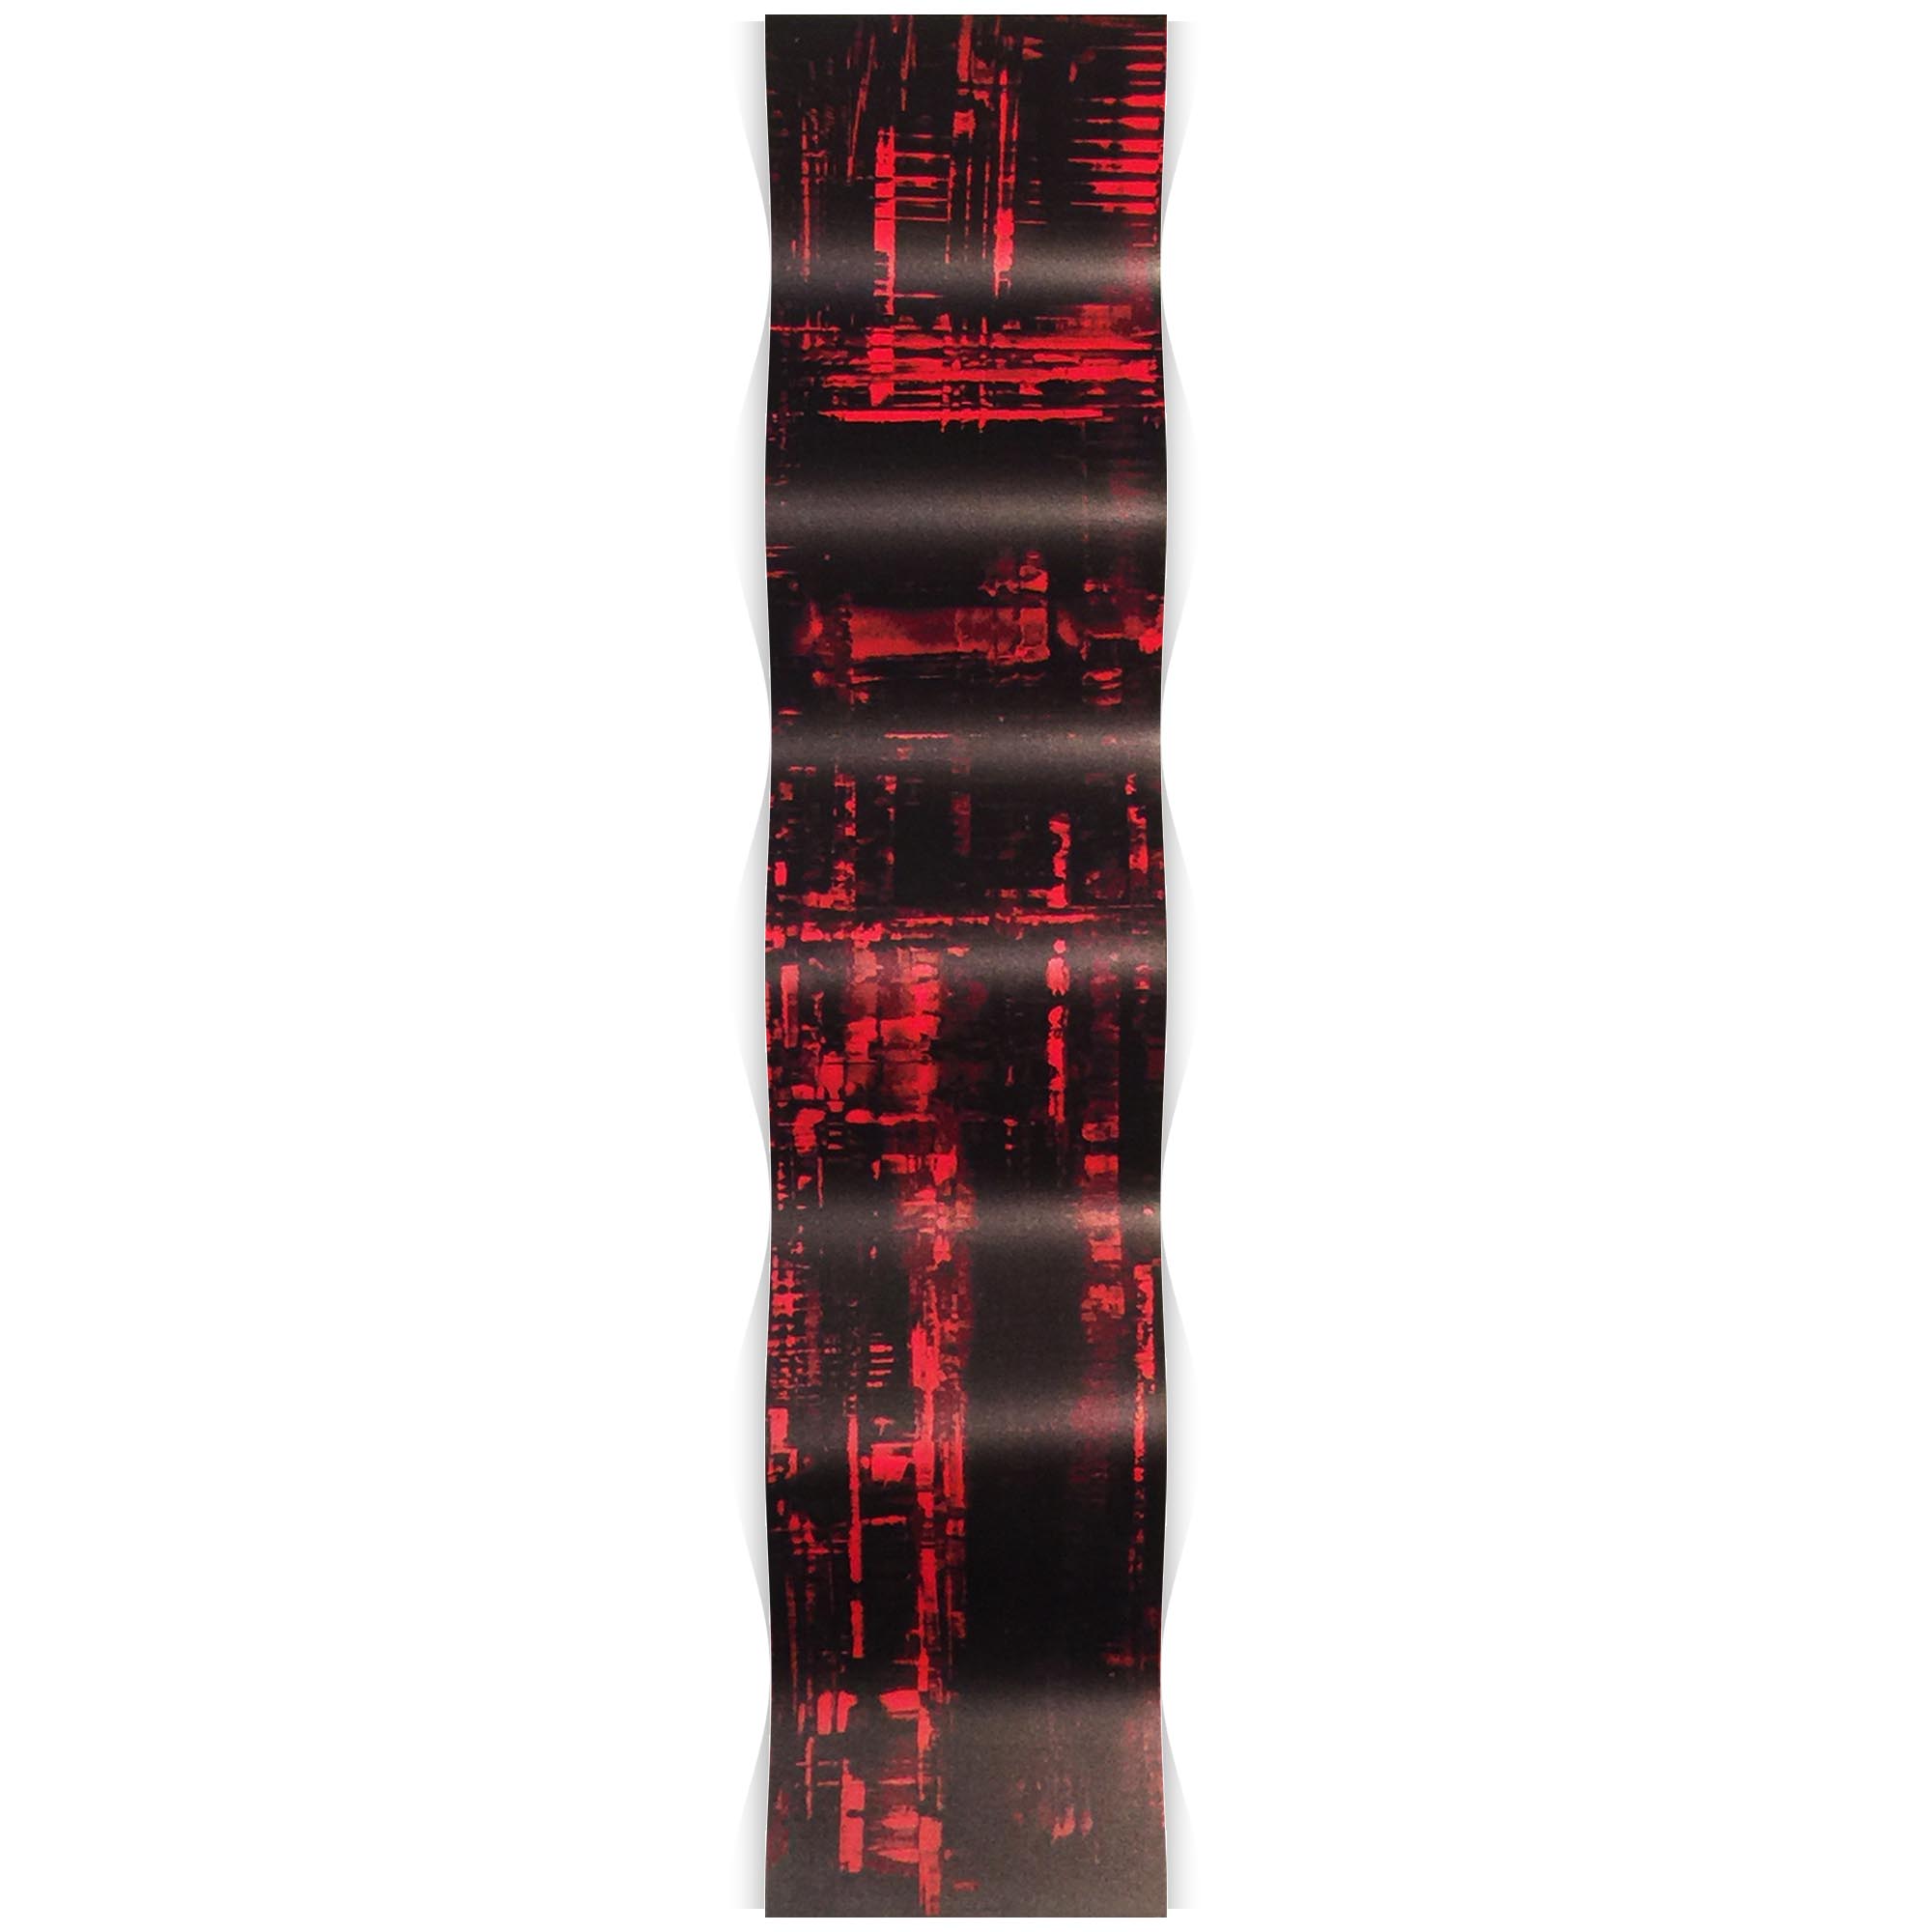 Aporia Red Wave 9.5x44in. Metal Eclectic Decor - Image 2